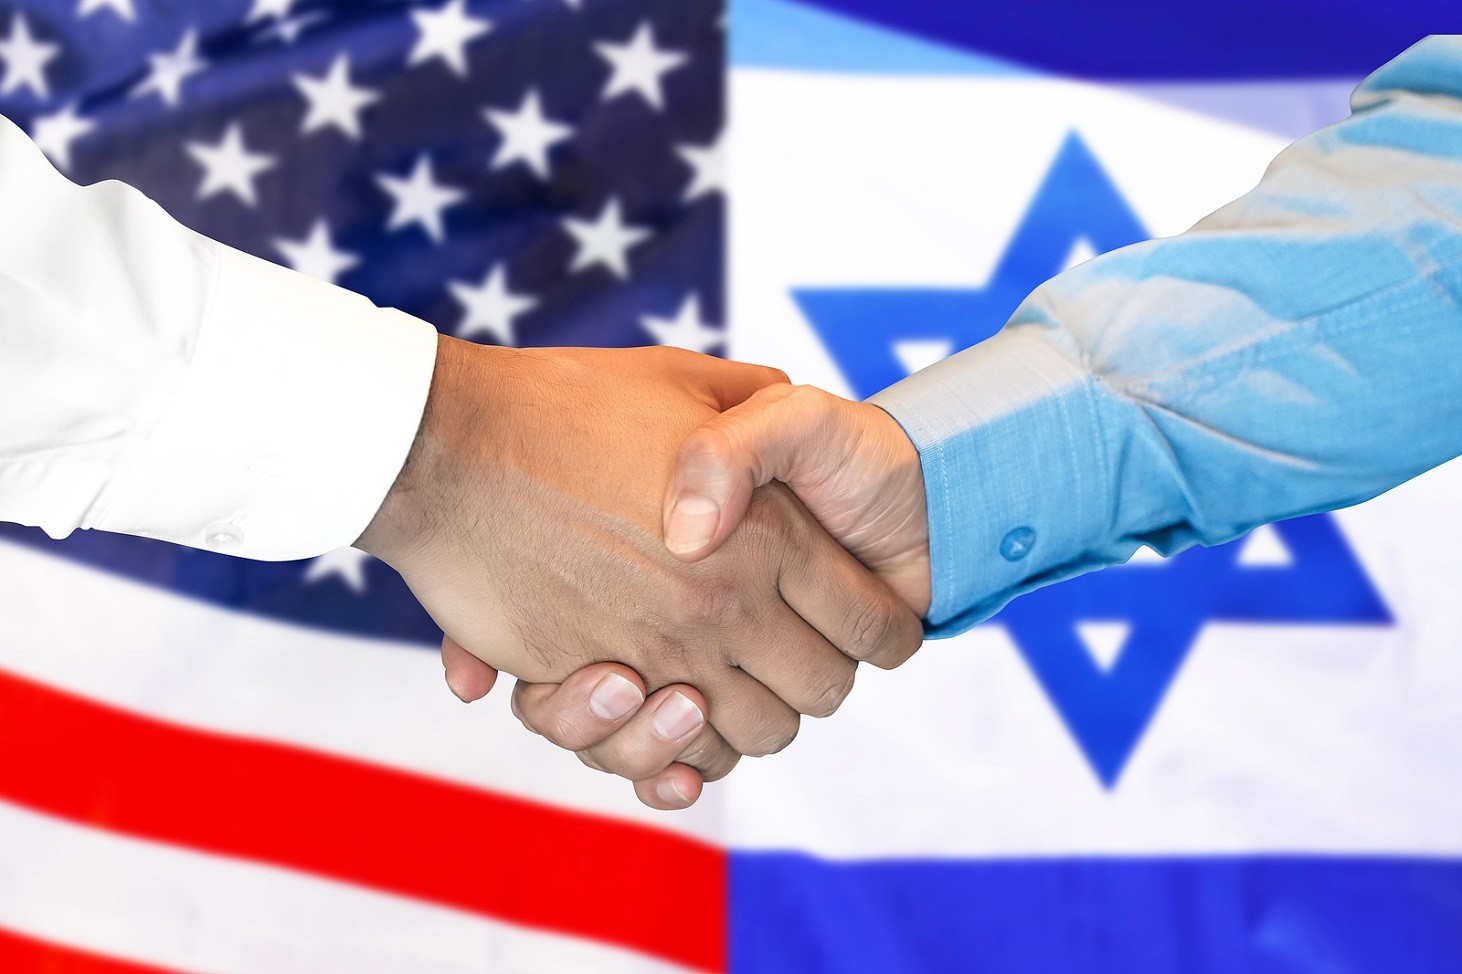 Business handshake on the background of two flags. Men handshake on the background of the United States of America and Israel flag. Support concept